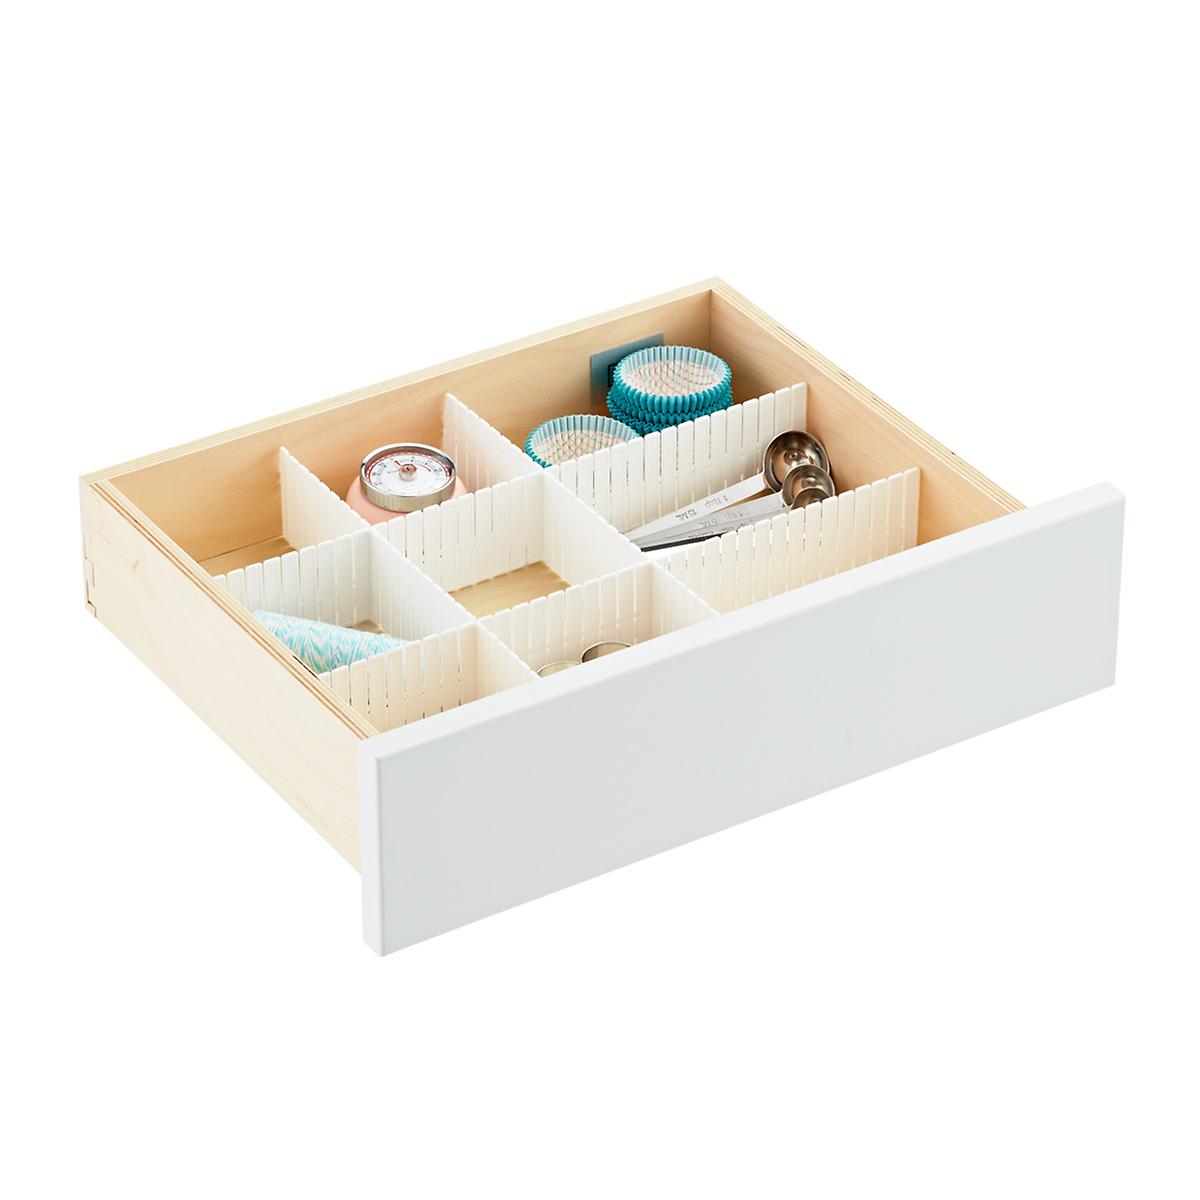 Slotted Interlocking Drawer Organizers The Container Store